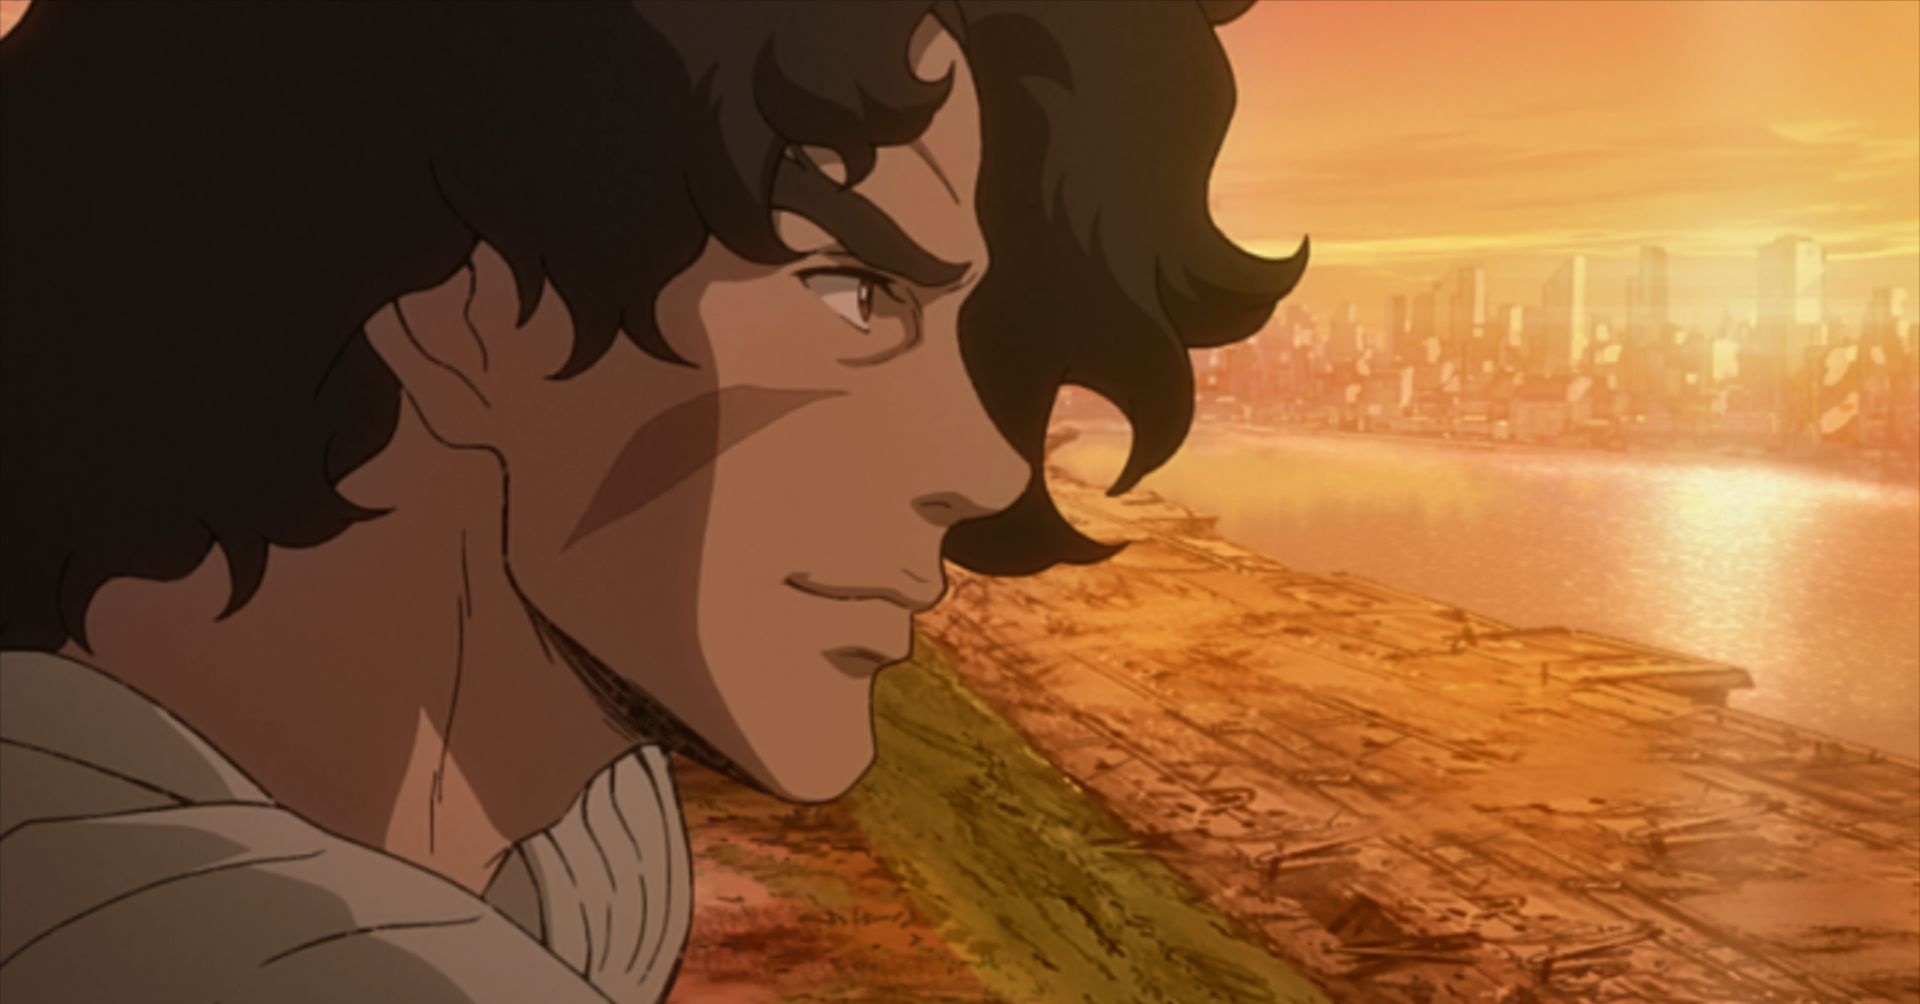 Joe looking towards the sunset in Megalo Box 2